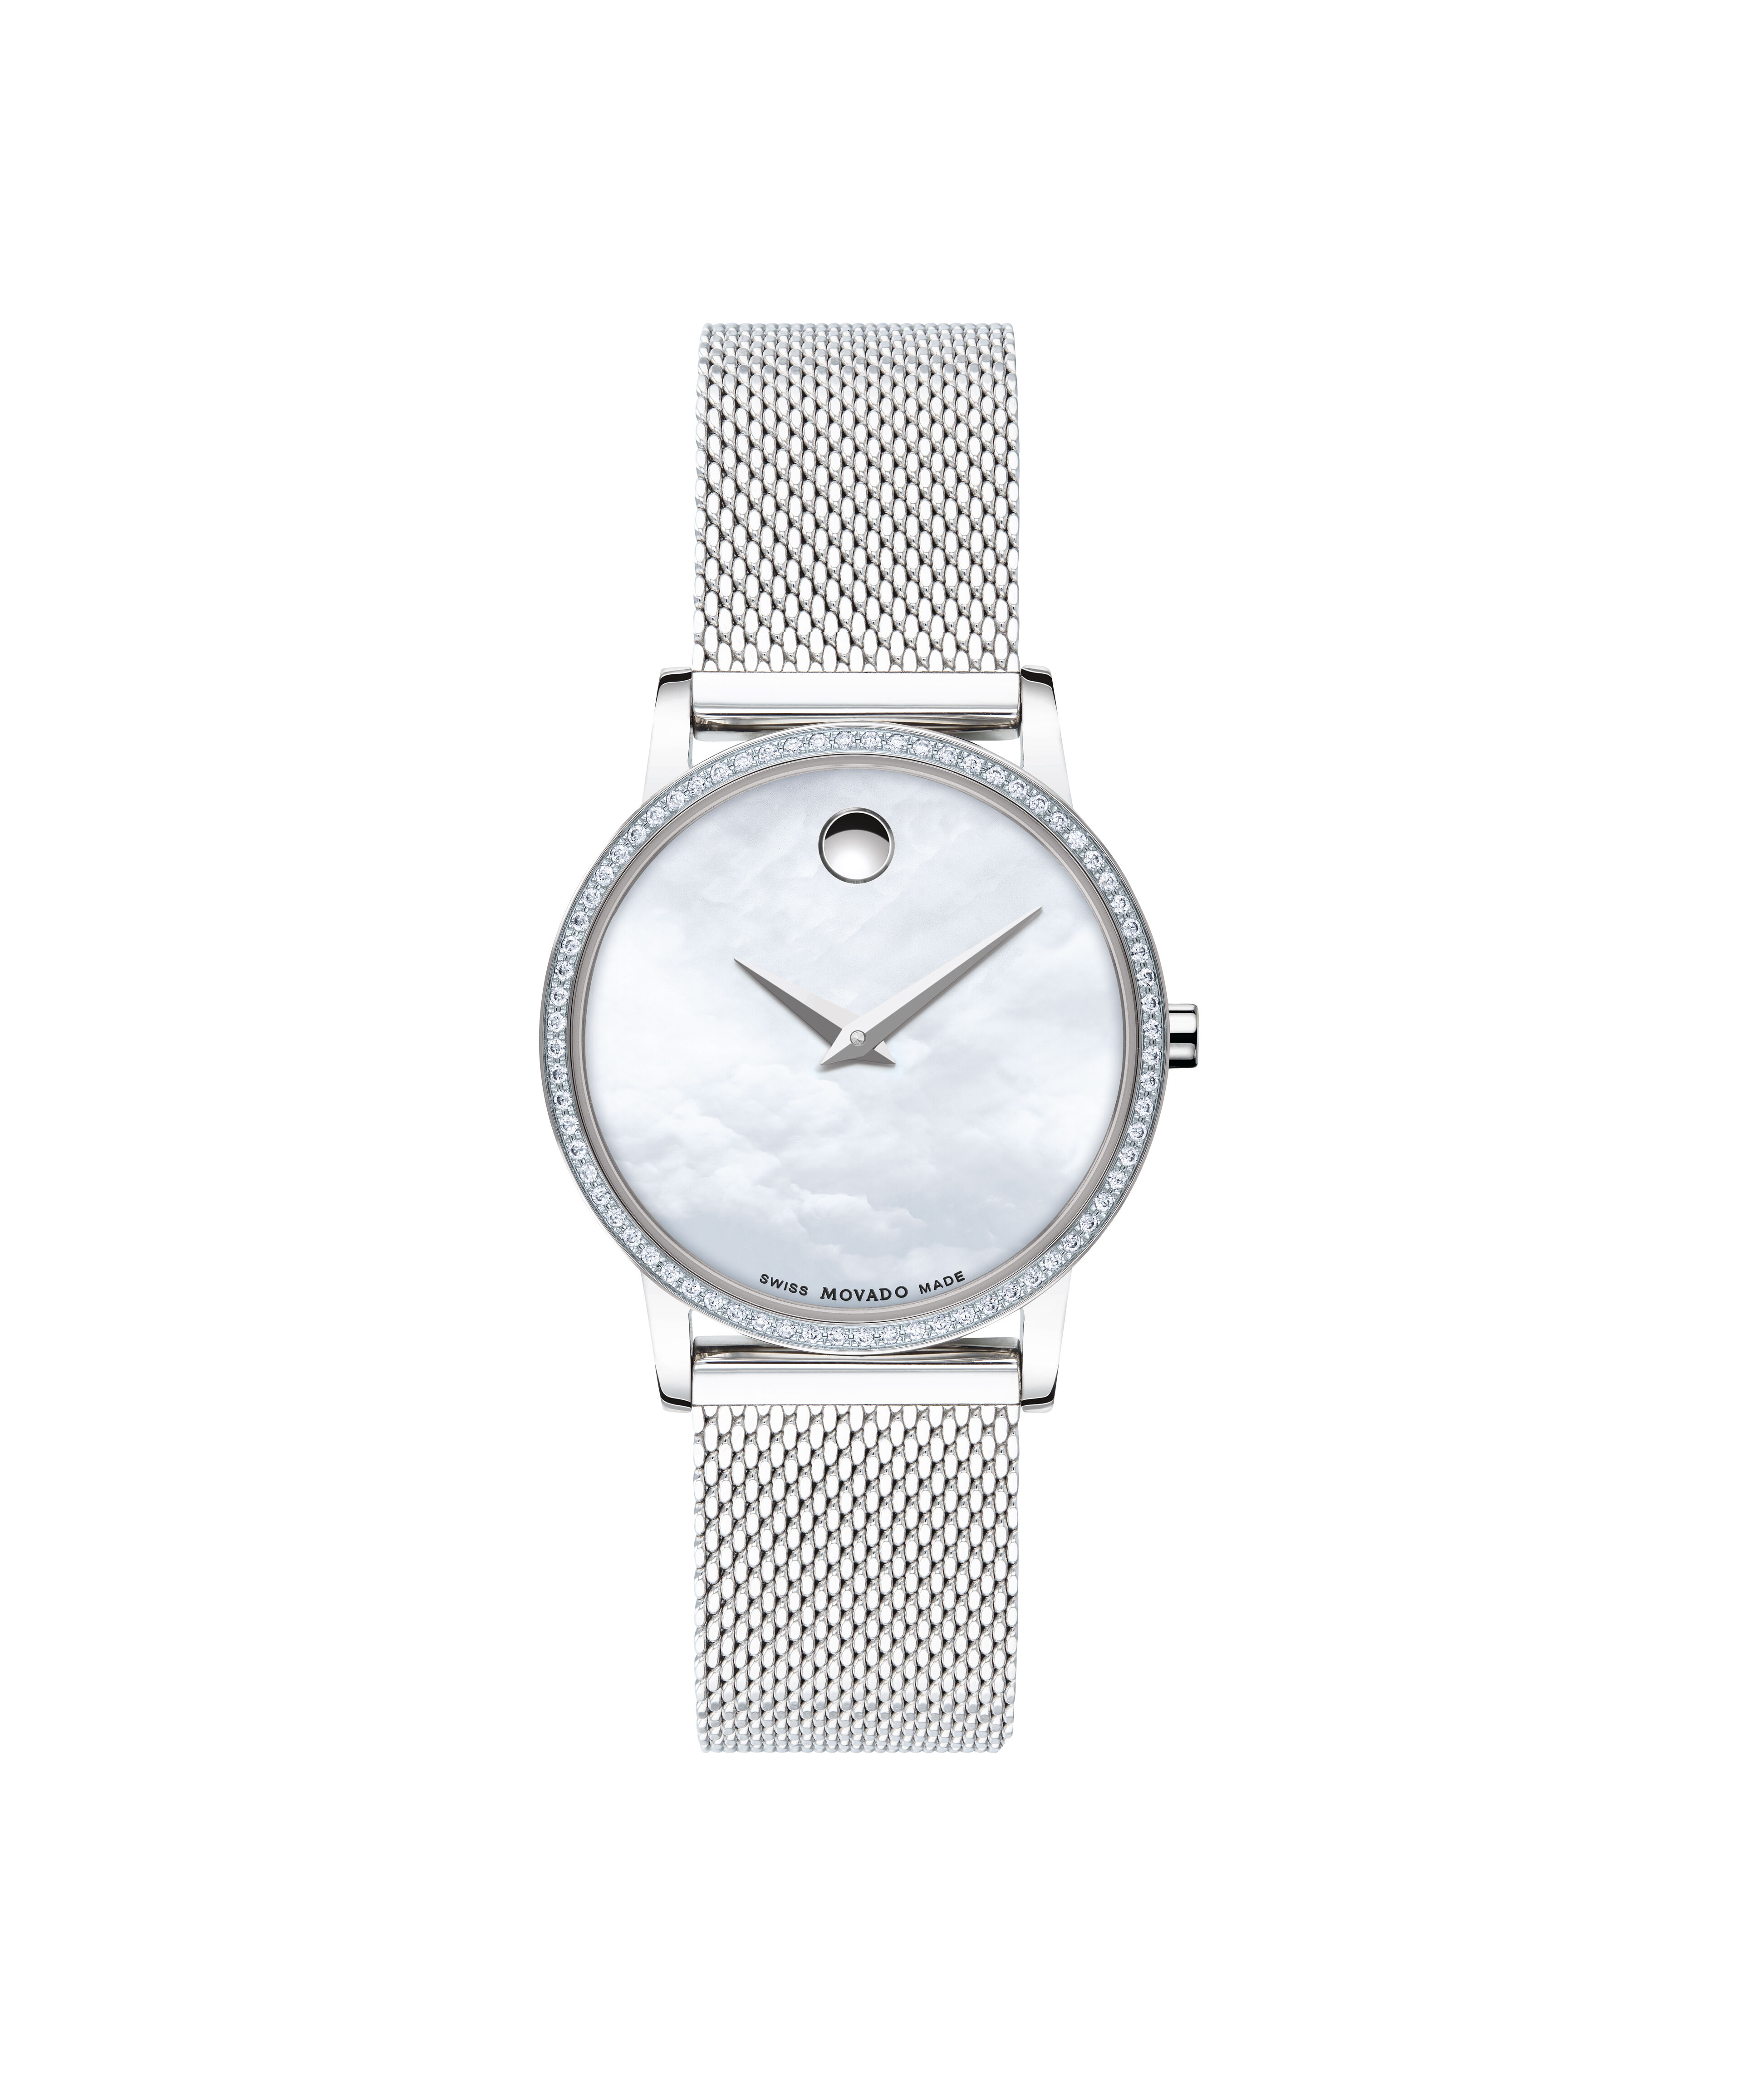 Movado of the mid-xx century with original crocodile leather strap